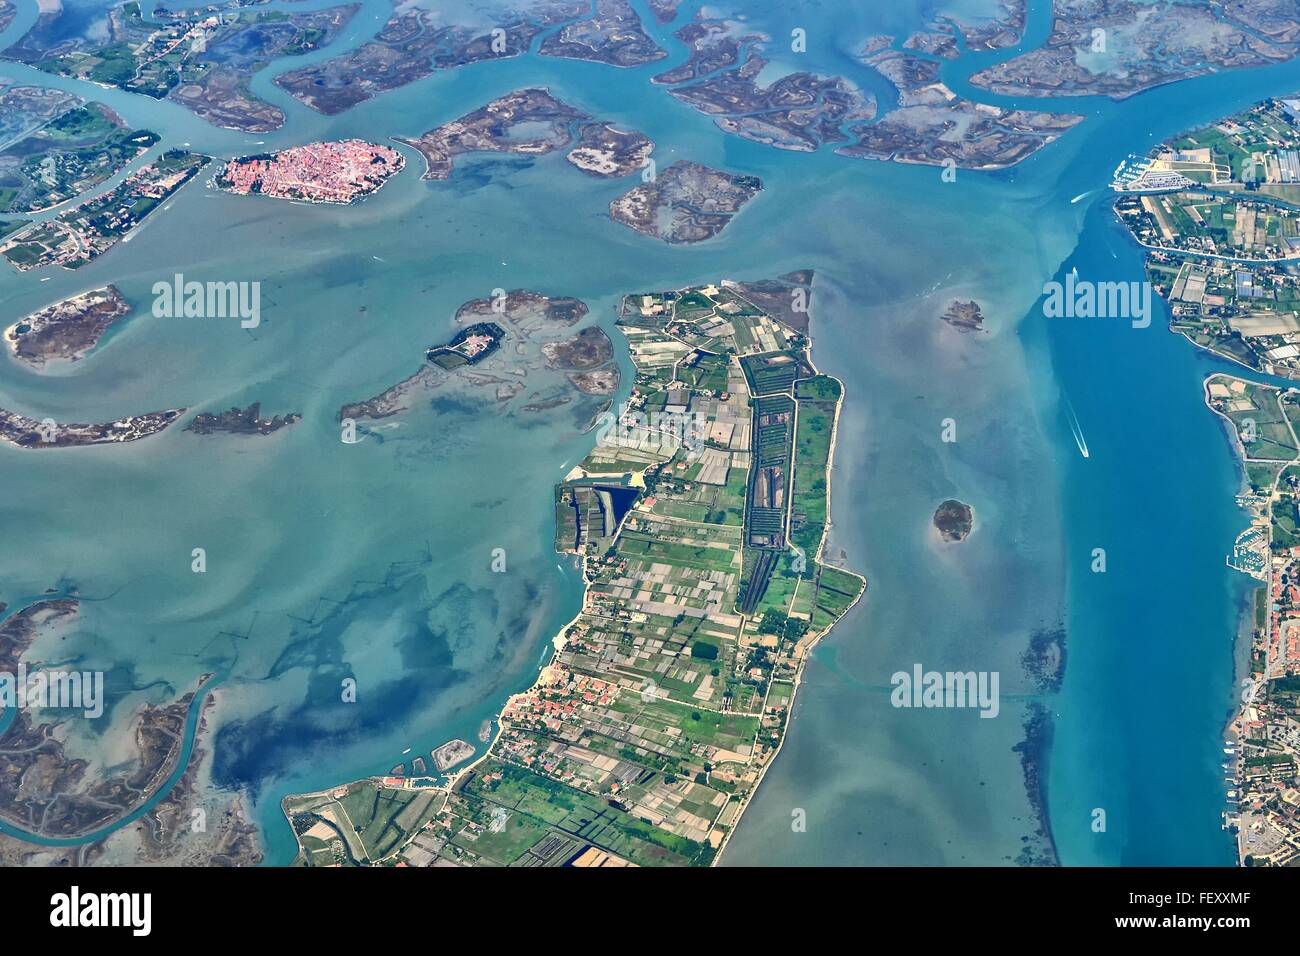 Aerial View Of Cityscape And Inlets Stock Photo